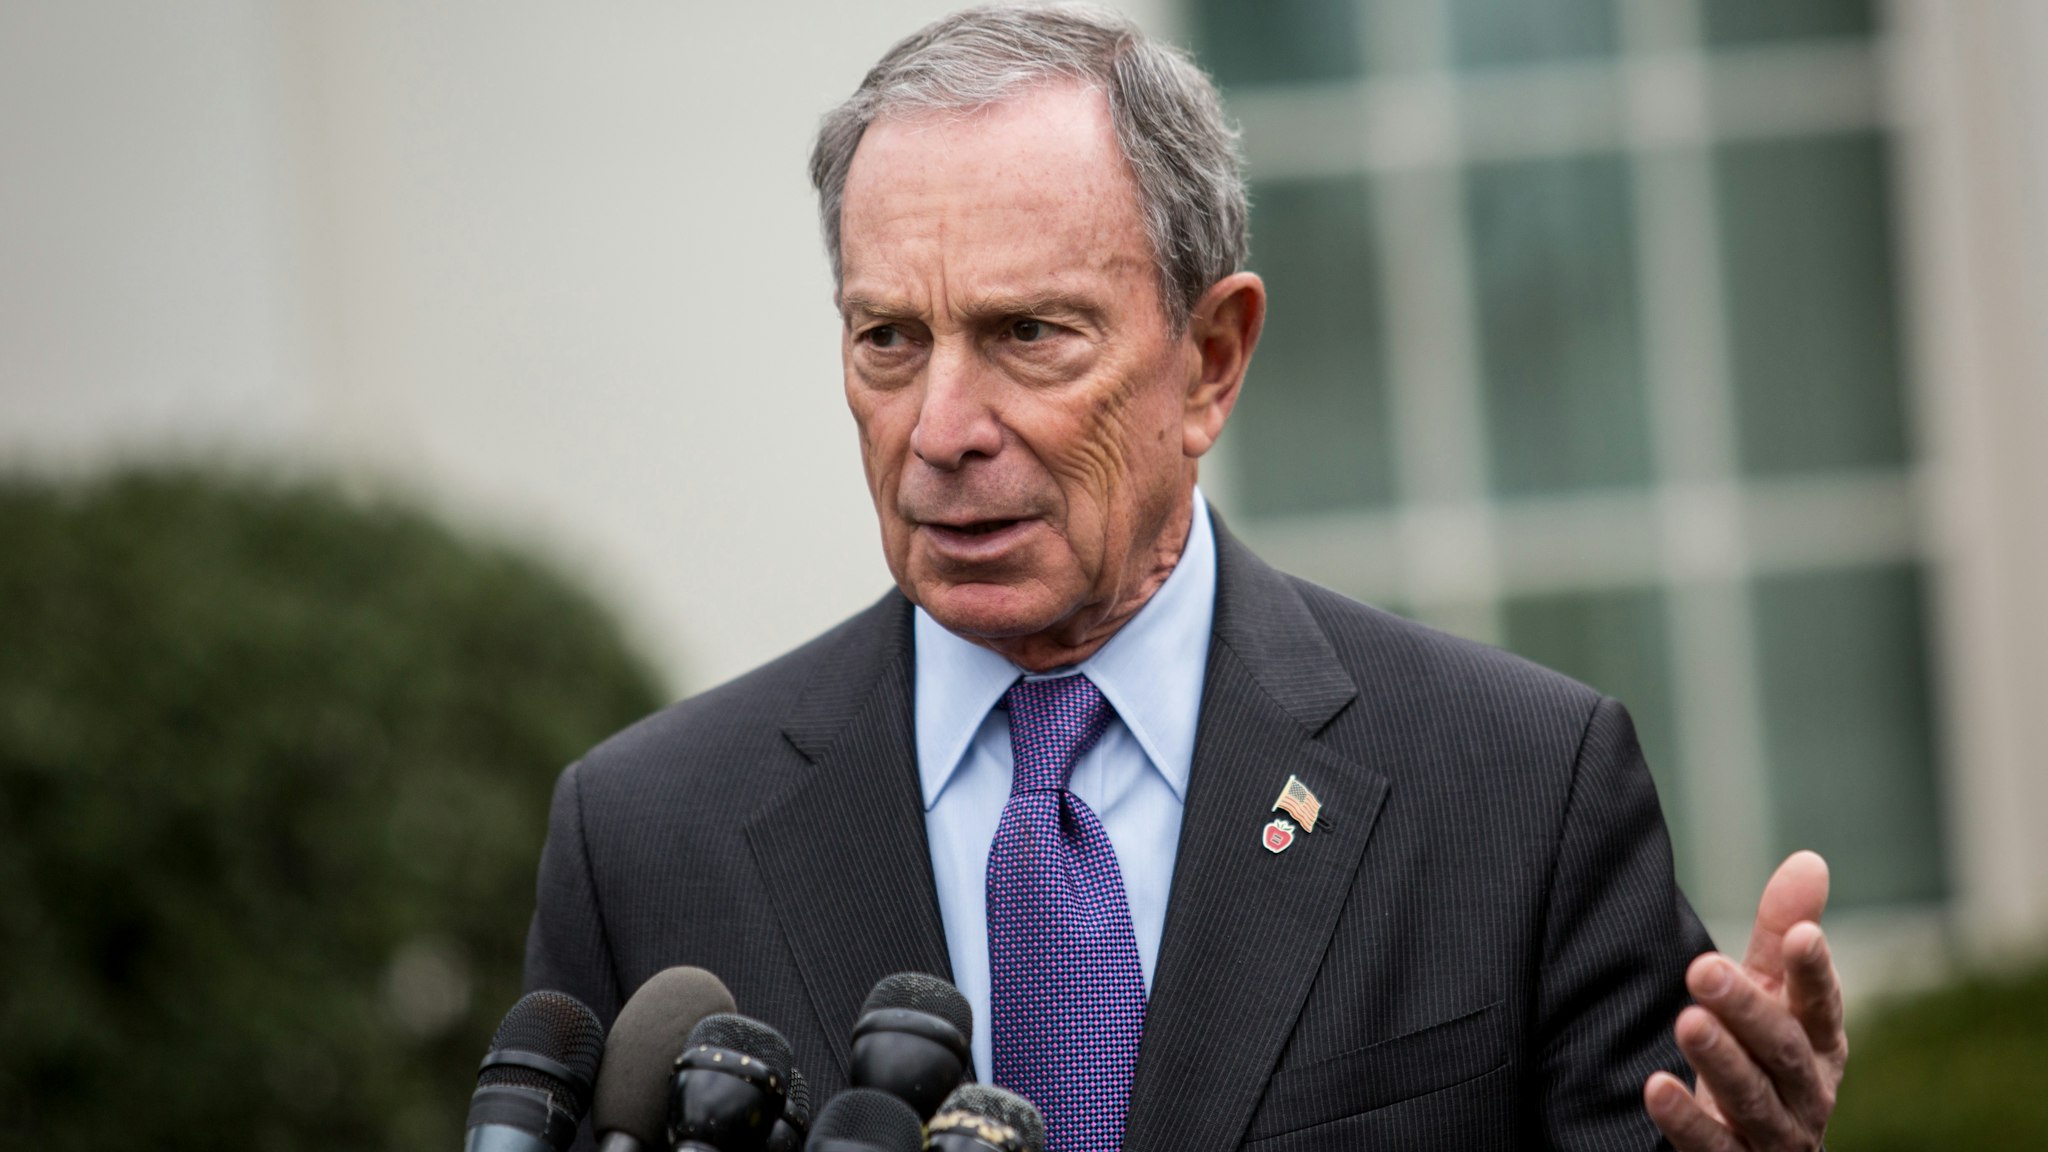 New York City Mayor Michael Bloomberg speaks to the media outside the West Wing of the White House after meeting with Vice President Joe Biden, February 27, 2013 in Washington, DC. Vice President Biden and Mayor Bloomberg discussed the Obama administration's proposals to reduce gun violence.